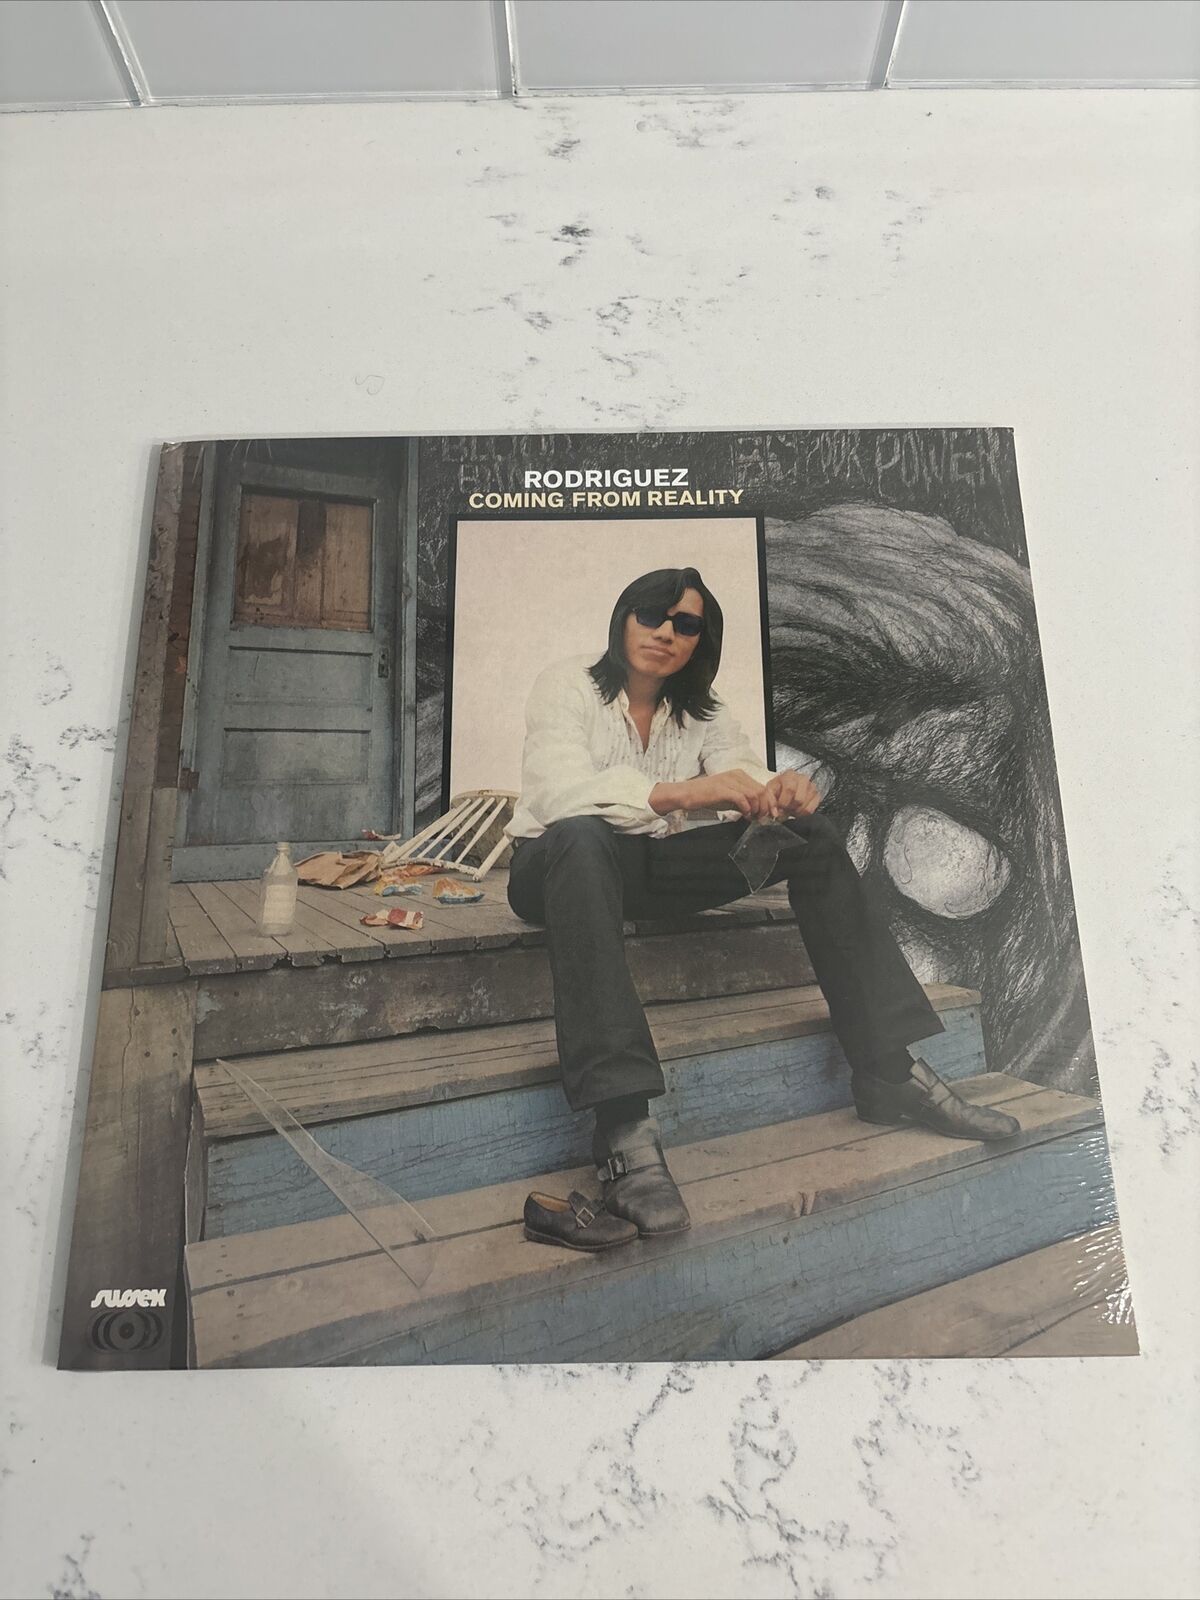 RARE “RODRIGUEZ: COMING FROM REALITY” ROCK LIMITED EXCLUSIVE ROCK VINYL RECORD